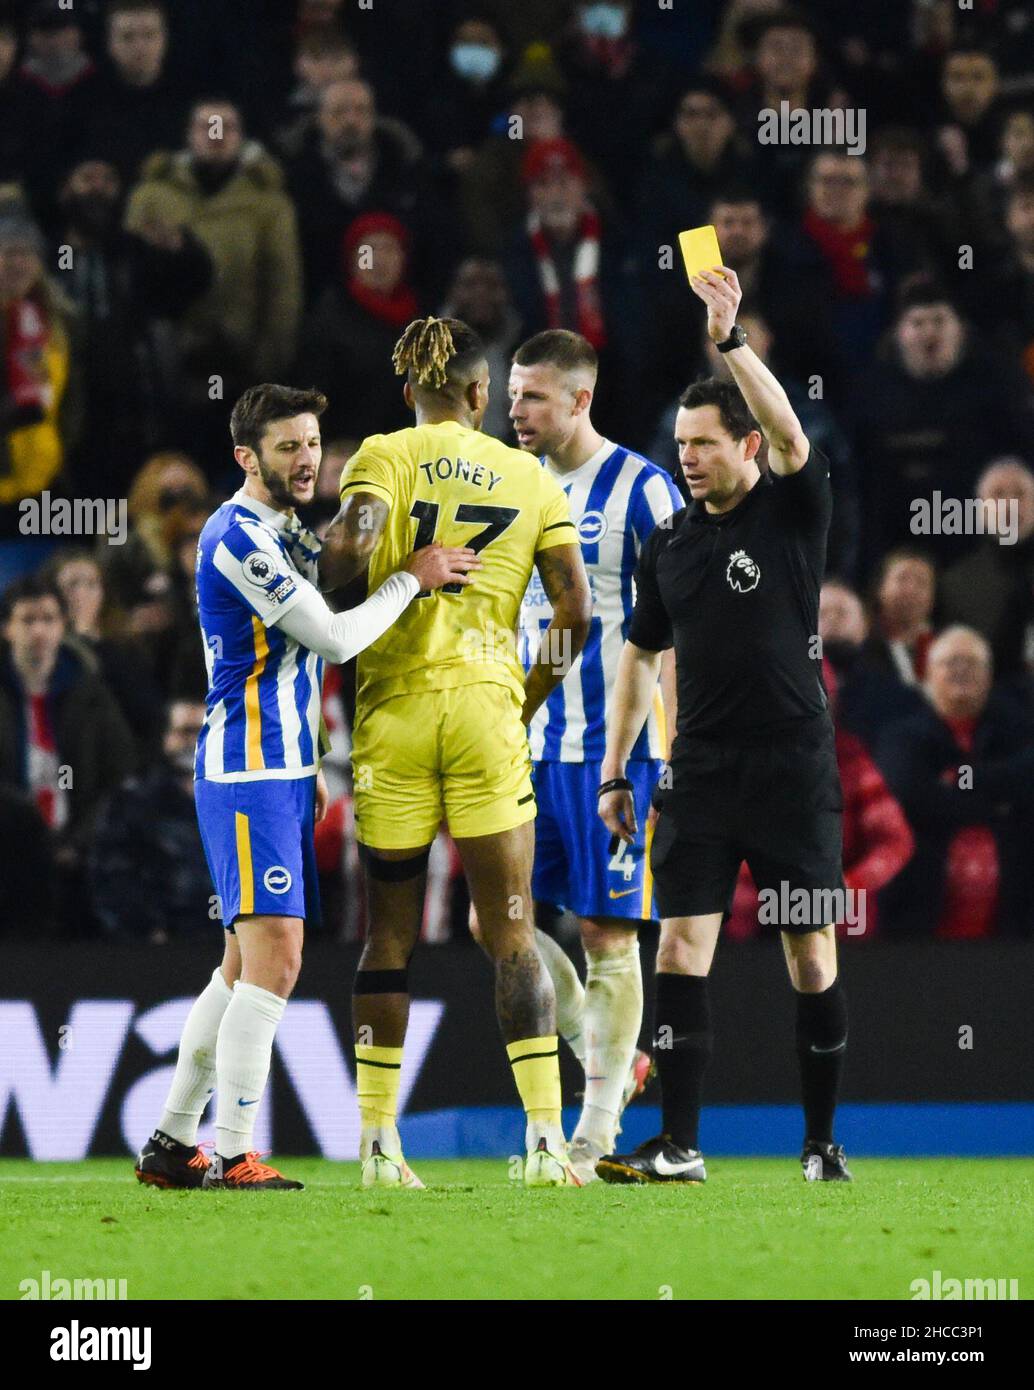 Ivan Toney of Brentford receives a yellow card for simulation from referee Andy Madley during the Premier League match between Brighton and Hove Albion and Brentford at The American Express Community Stadium  , Brighton,  UK - 26th December 2021 - Editorial use only. No merchandising. For Football images FA and Premier League restrictions apply inc. no internet/mobile usage without FAPL license - for details contact Football Dataco Stock Photo